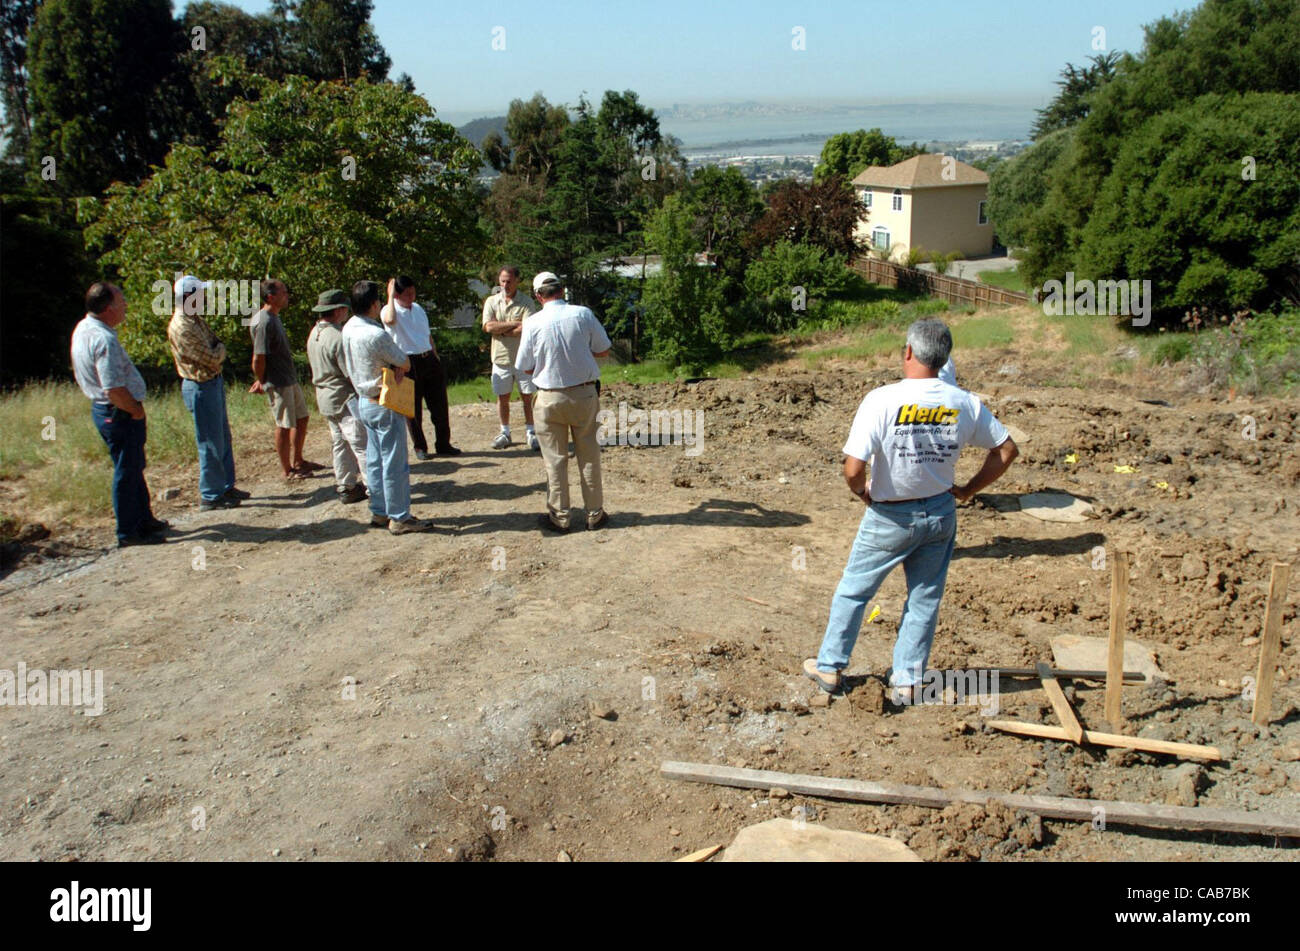 The city inspectors meet with Baljit Dhaliwal to see if the neighbors concerns about an ephemeral creek can be alleviated in the building of his residence on Tuesday April 27, 2004 in El Cerrito, Calif.   The construction has been stopped until a creek compromise could be reached.    (Contra Costa T Stock Photo